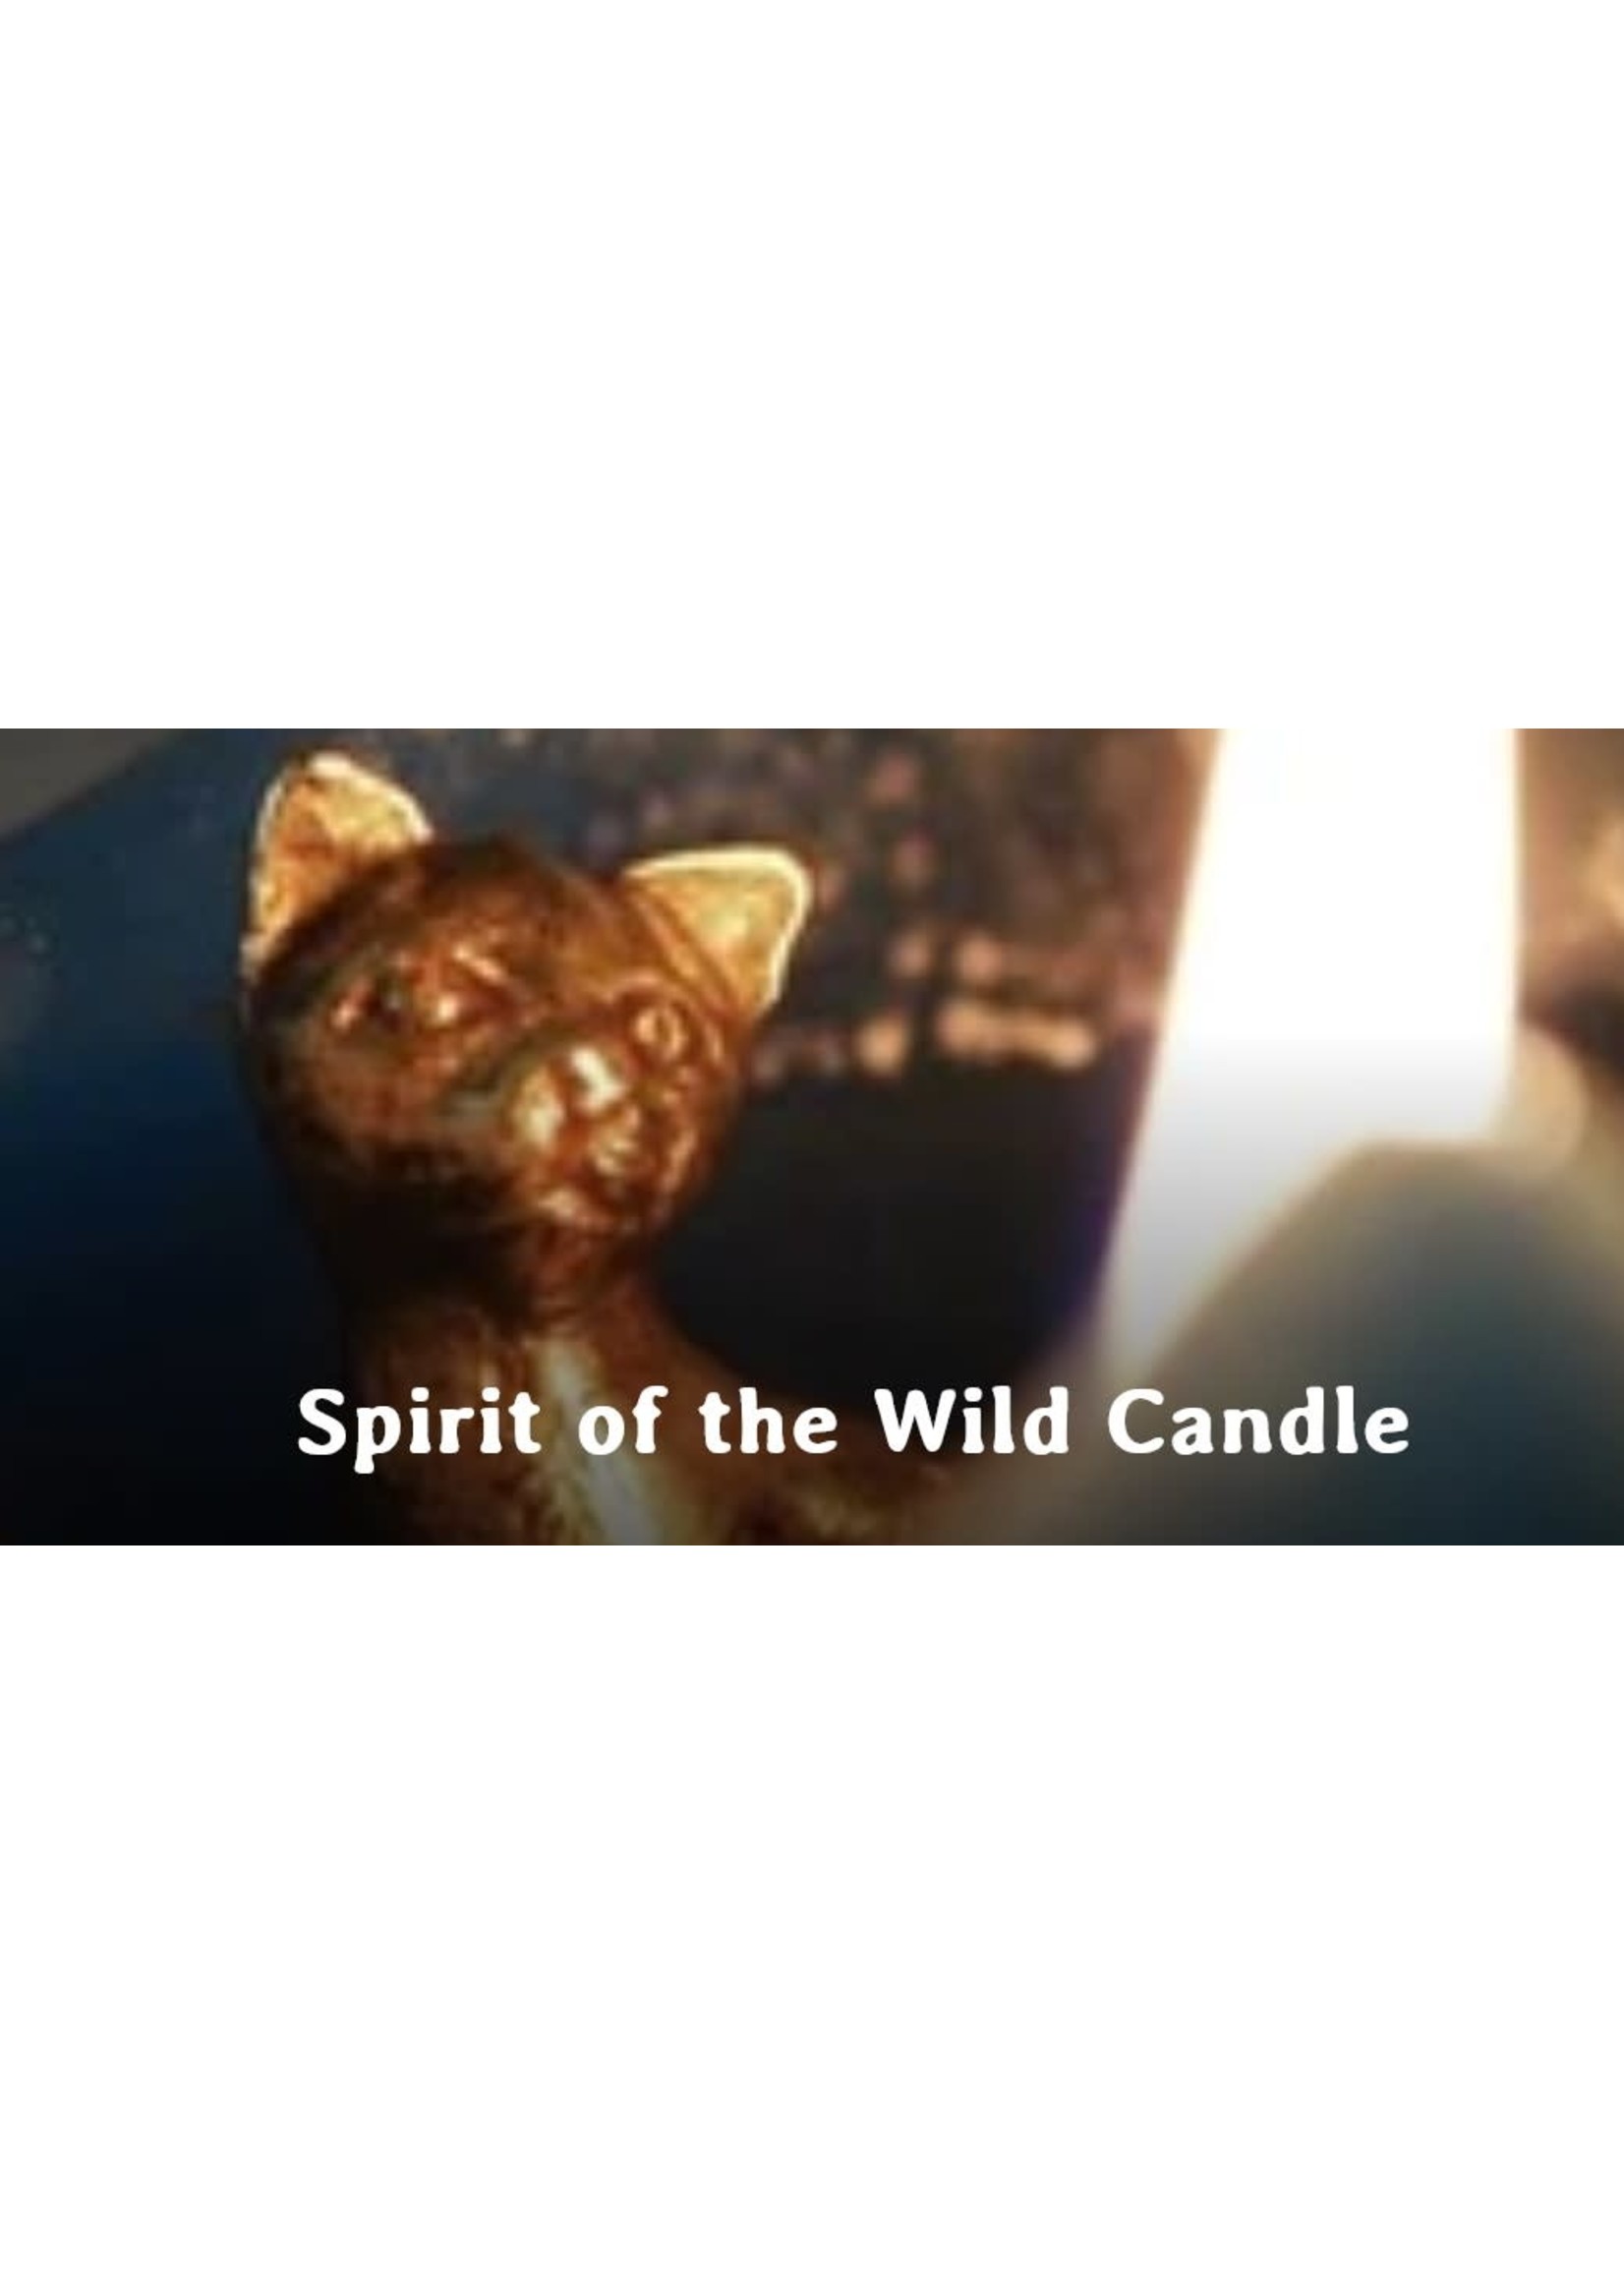 SoulTerra Pyramid Candles - Spirit of the Wild Candle